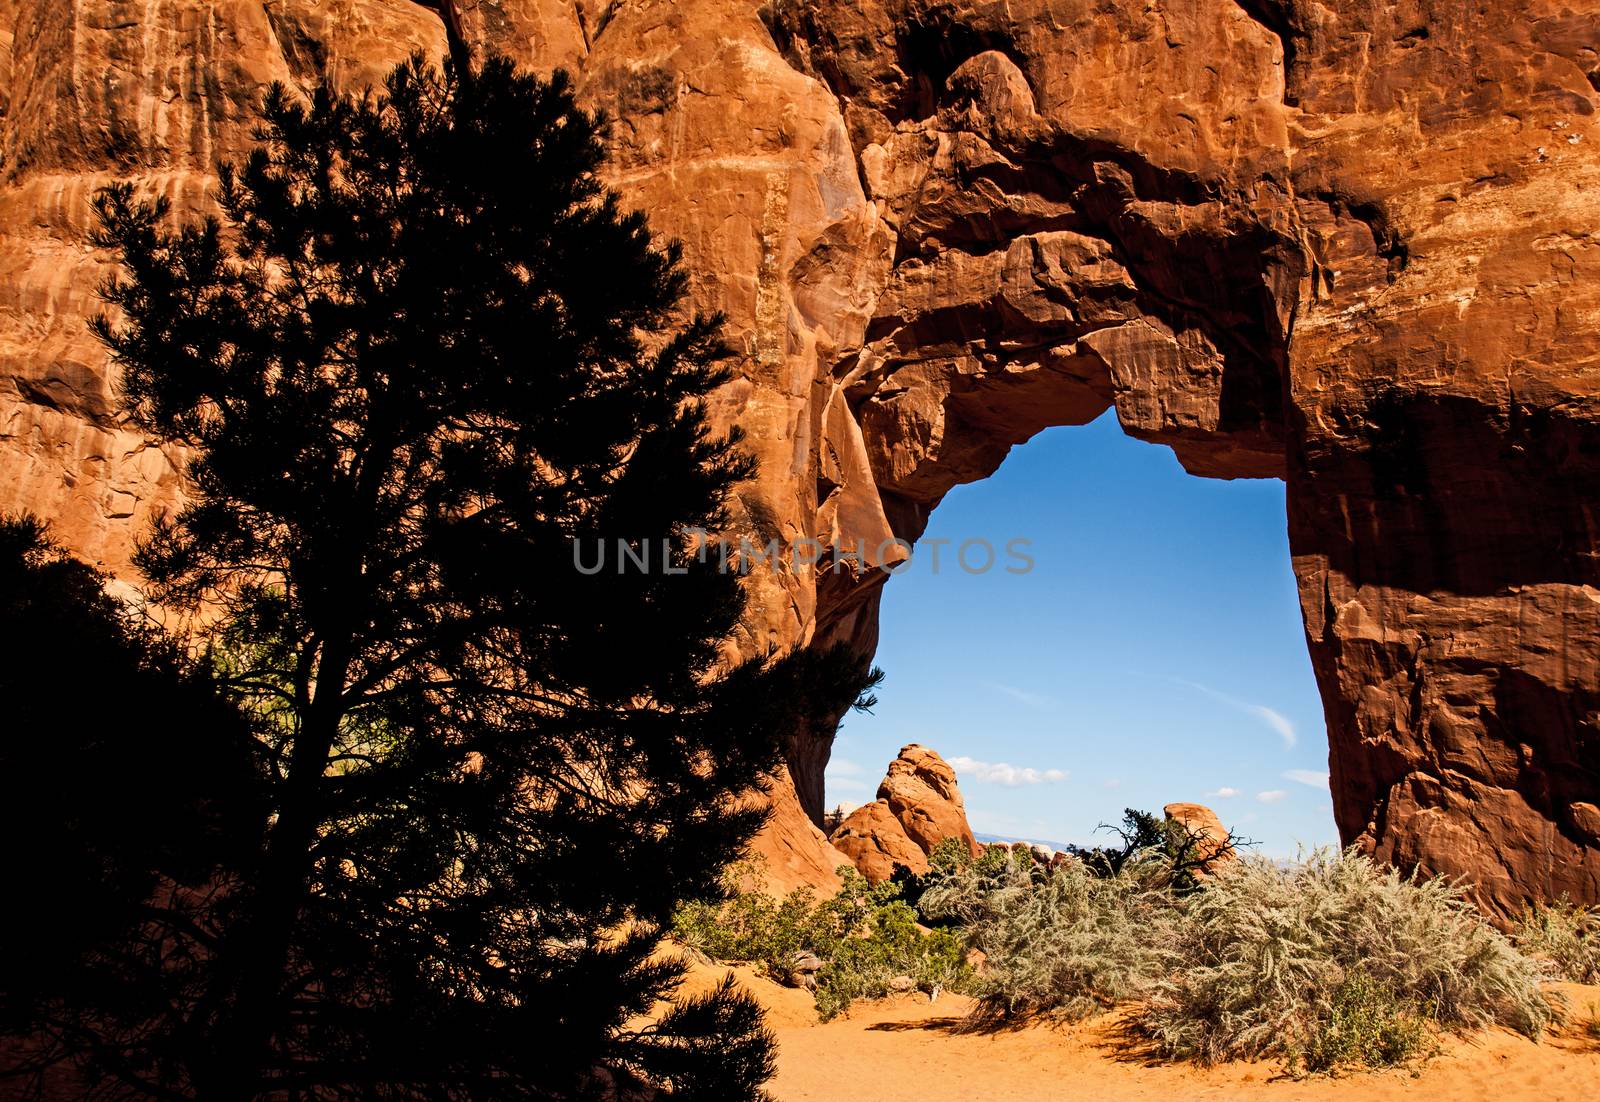 The Pine Tree Arch in Arches National Park. Utah